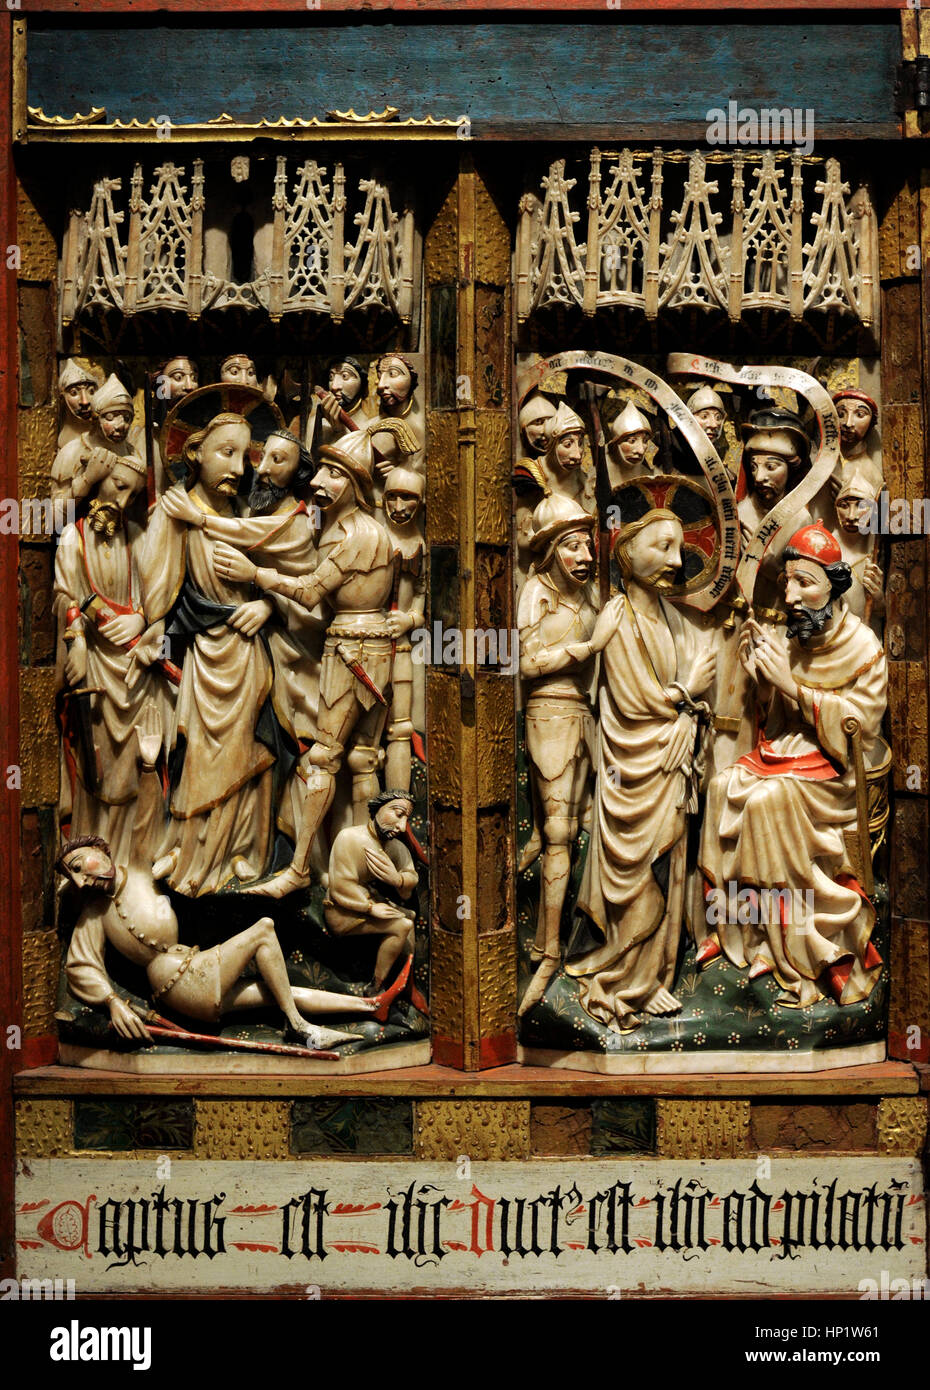 English artist. Manufacturing of Nottingham. Triptych of Passion, ca.1350-1400. Detail of Kiss of Judas and Jesus before Pilate. Alabaster, wood and glass. National Museum of Capodimonte. Naples. Italy. Stock Photo